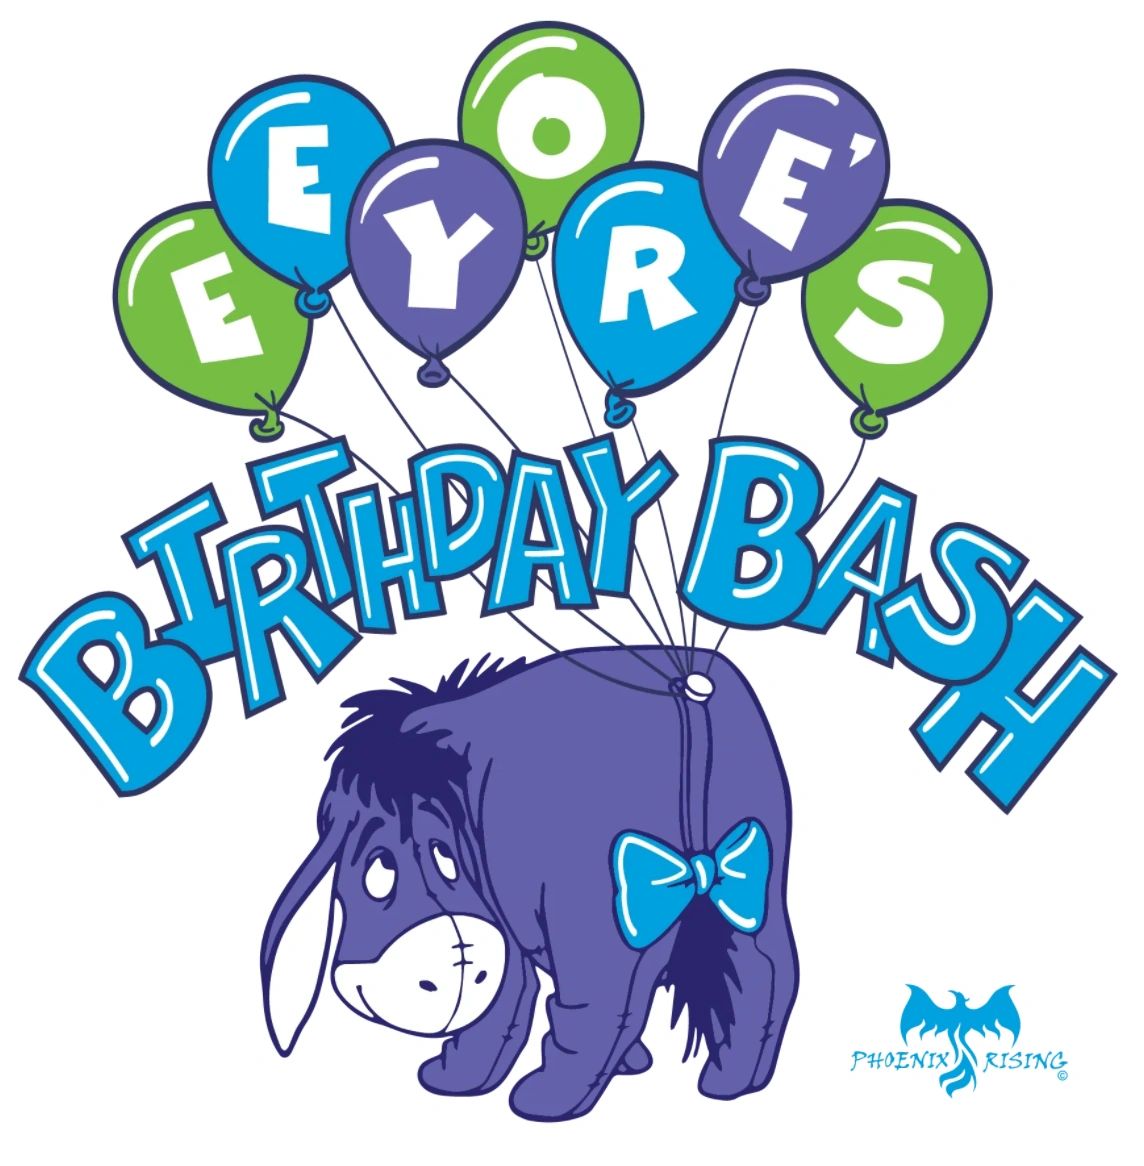 Eyeore birthday bash phoenix rising bowling green community event fun lampkin park all ages